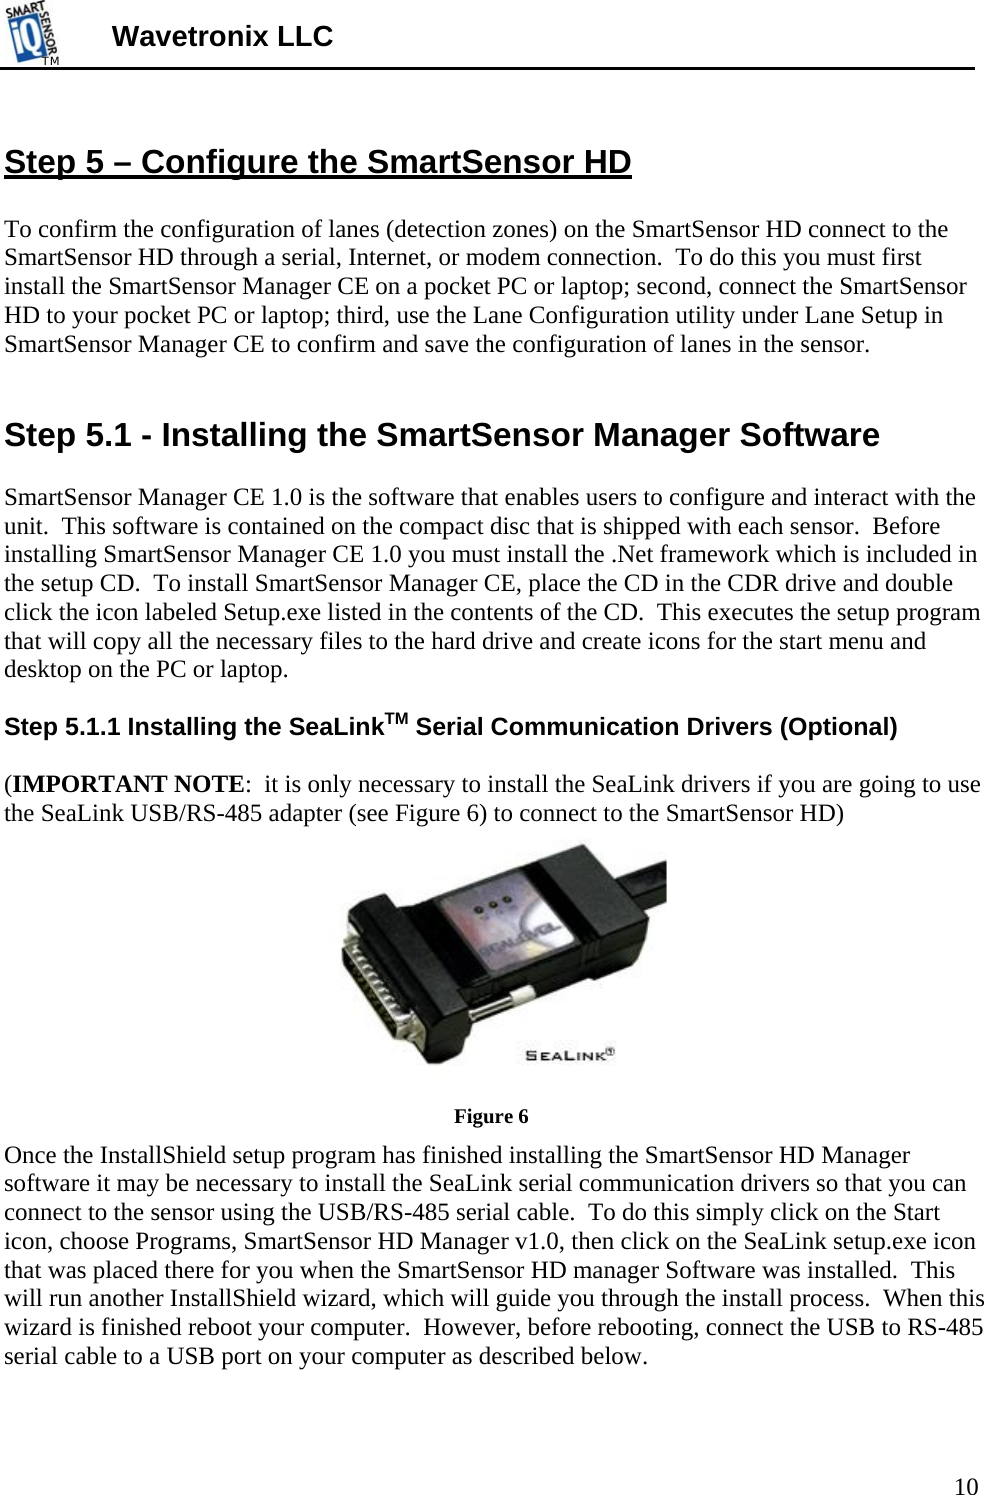 TMTM  Wavetronix LLC      Step 5 – Configure the SmartSensor HD  To confirm the configuration of lanes (detection zones) on the SmartSensor HD connect to the SmartSensor HD through a serial, Internet, or modem connection.  To do this you must first install the SmartSensor Manager CE on a pocket PC or laptop; second, connect the SmartSensor HD to your pocket PC or laptop; third, use the Lane Configuration utility under Lane Setup in SmartSensor Manager CE to confirm and save the configuration of lanes in the sensor.   Step 5.1 - Installing the SmartSensor Manager Software  SmartSensor Manager CE 1.0 is the software that enables users to configure and interact with the unit.  This software is contained on the compact disc that is shipped with each sensor.  Before installing SmartSensor Manager CE 1.0 you must install the .Net framework which is included in the setup CD.  To install SmartSensor Manager CE, place the CD in the CDR drive and double click the icon labeled Setup.exe listed in the contents of the CD.  This executes the setup program that will copy all the necessary files to the hard drive and create icons for the start menu and desktop on the PC or laptop.    Step 5.1.1 Installing the SeaLinkTM Serial Communication Drivers (Optional)  (IMPORTANT NOTE:  it is only necessary to install the SeaLink drivers if you are going to use the SeaLink USB/RS-485 adapter (see Figure 6) to connect to the SmartSensor HD)  Figure 6 Once the InstallShield setup program has finished installing the SmartSensor HD Manager software it may be necessary to install the SeaLink serial communication drivers so that you can connect to the sensor using the USB/RS-485 serial cable.  To do this simply click on the Start icon, choose Programs, SmartSensor HD Manager v1.0, then click on the SeaLink setup.exe icon that was placed there for you when the SmartSensor HD manager Software was installed.  This will run another InstallShield wizard, which will guide you through the install process.  When this wizard is finished reboot your computer.  However, before rebooting, connect the USB to RS-485 serial cable to a USB port on your computer as described below.  10 